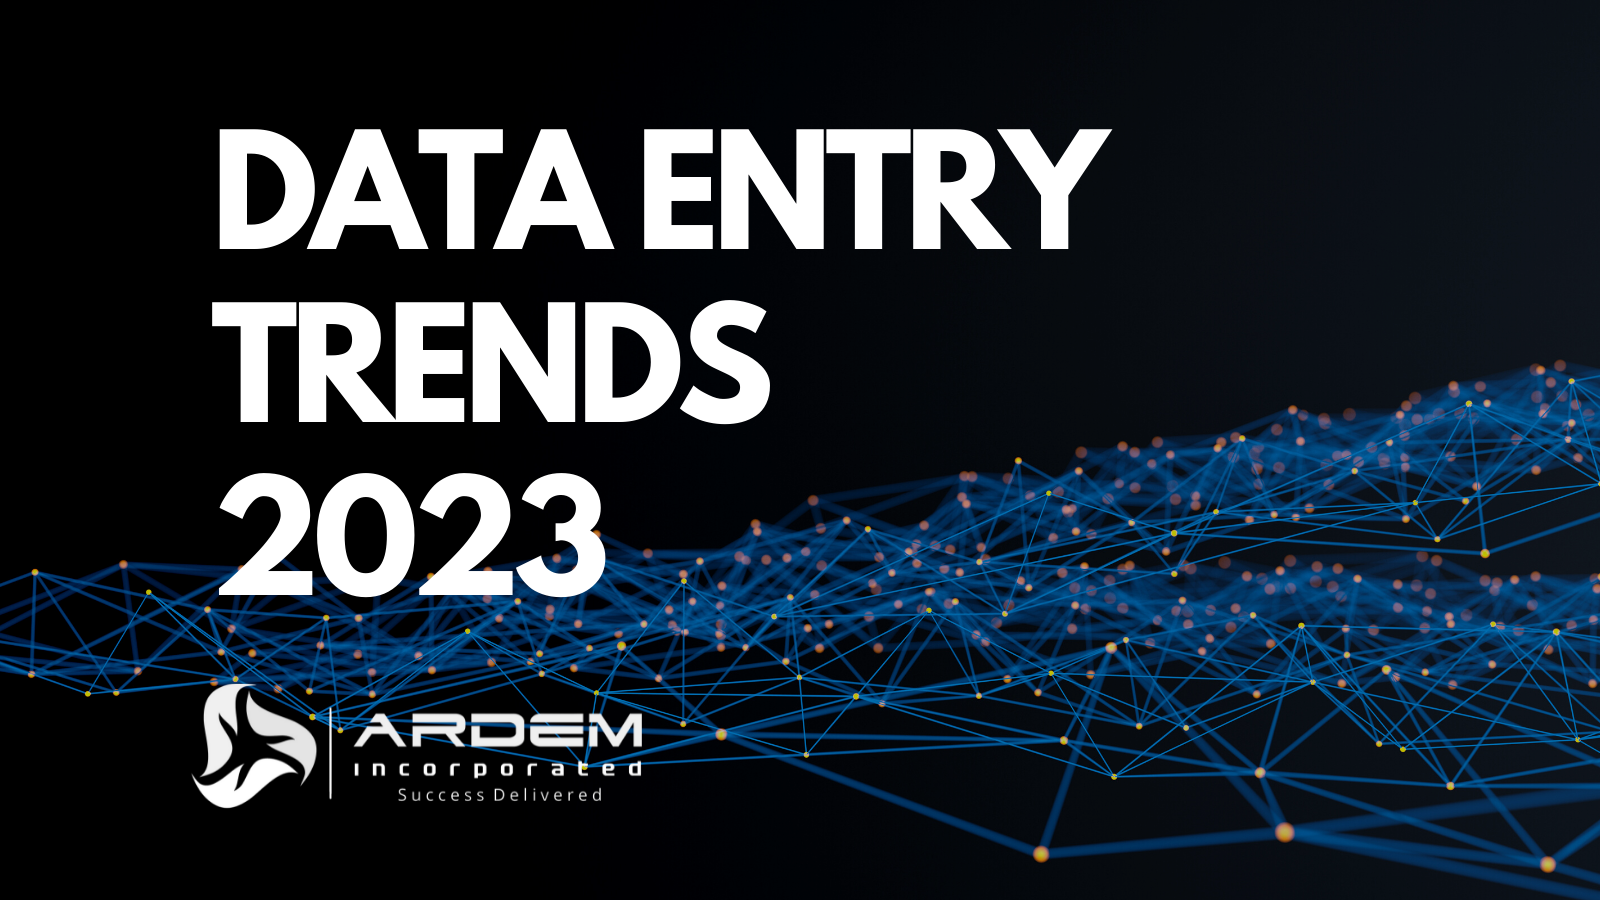 Data Entry Outsourcing Trends 2023 Blog